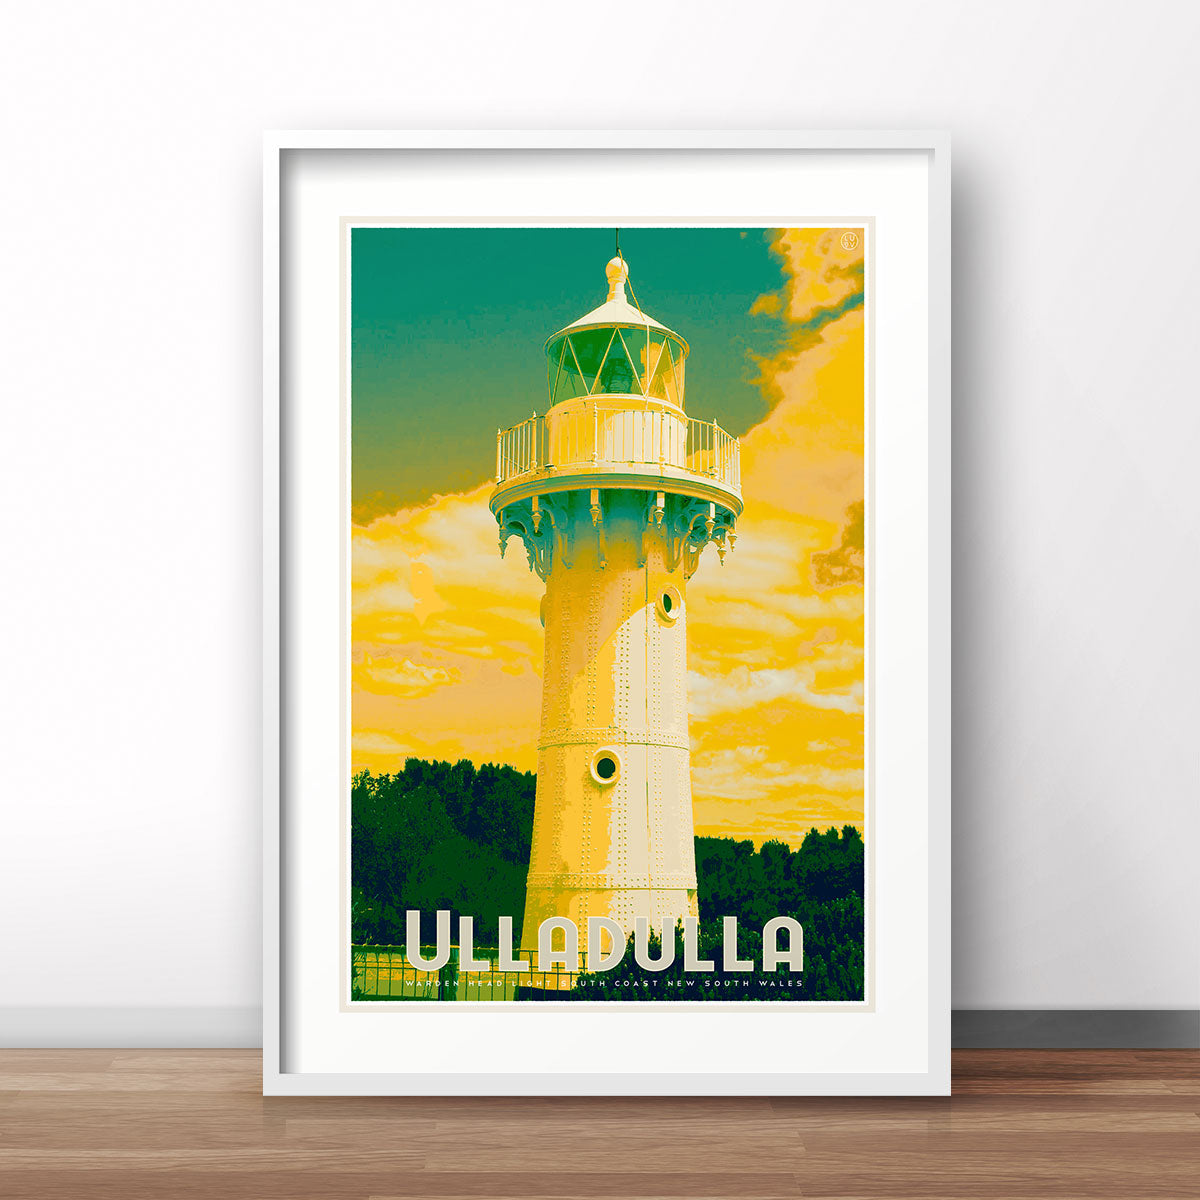 Ulladulla lighthouse vintage retro poster print from places we luv 